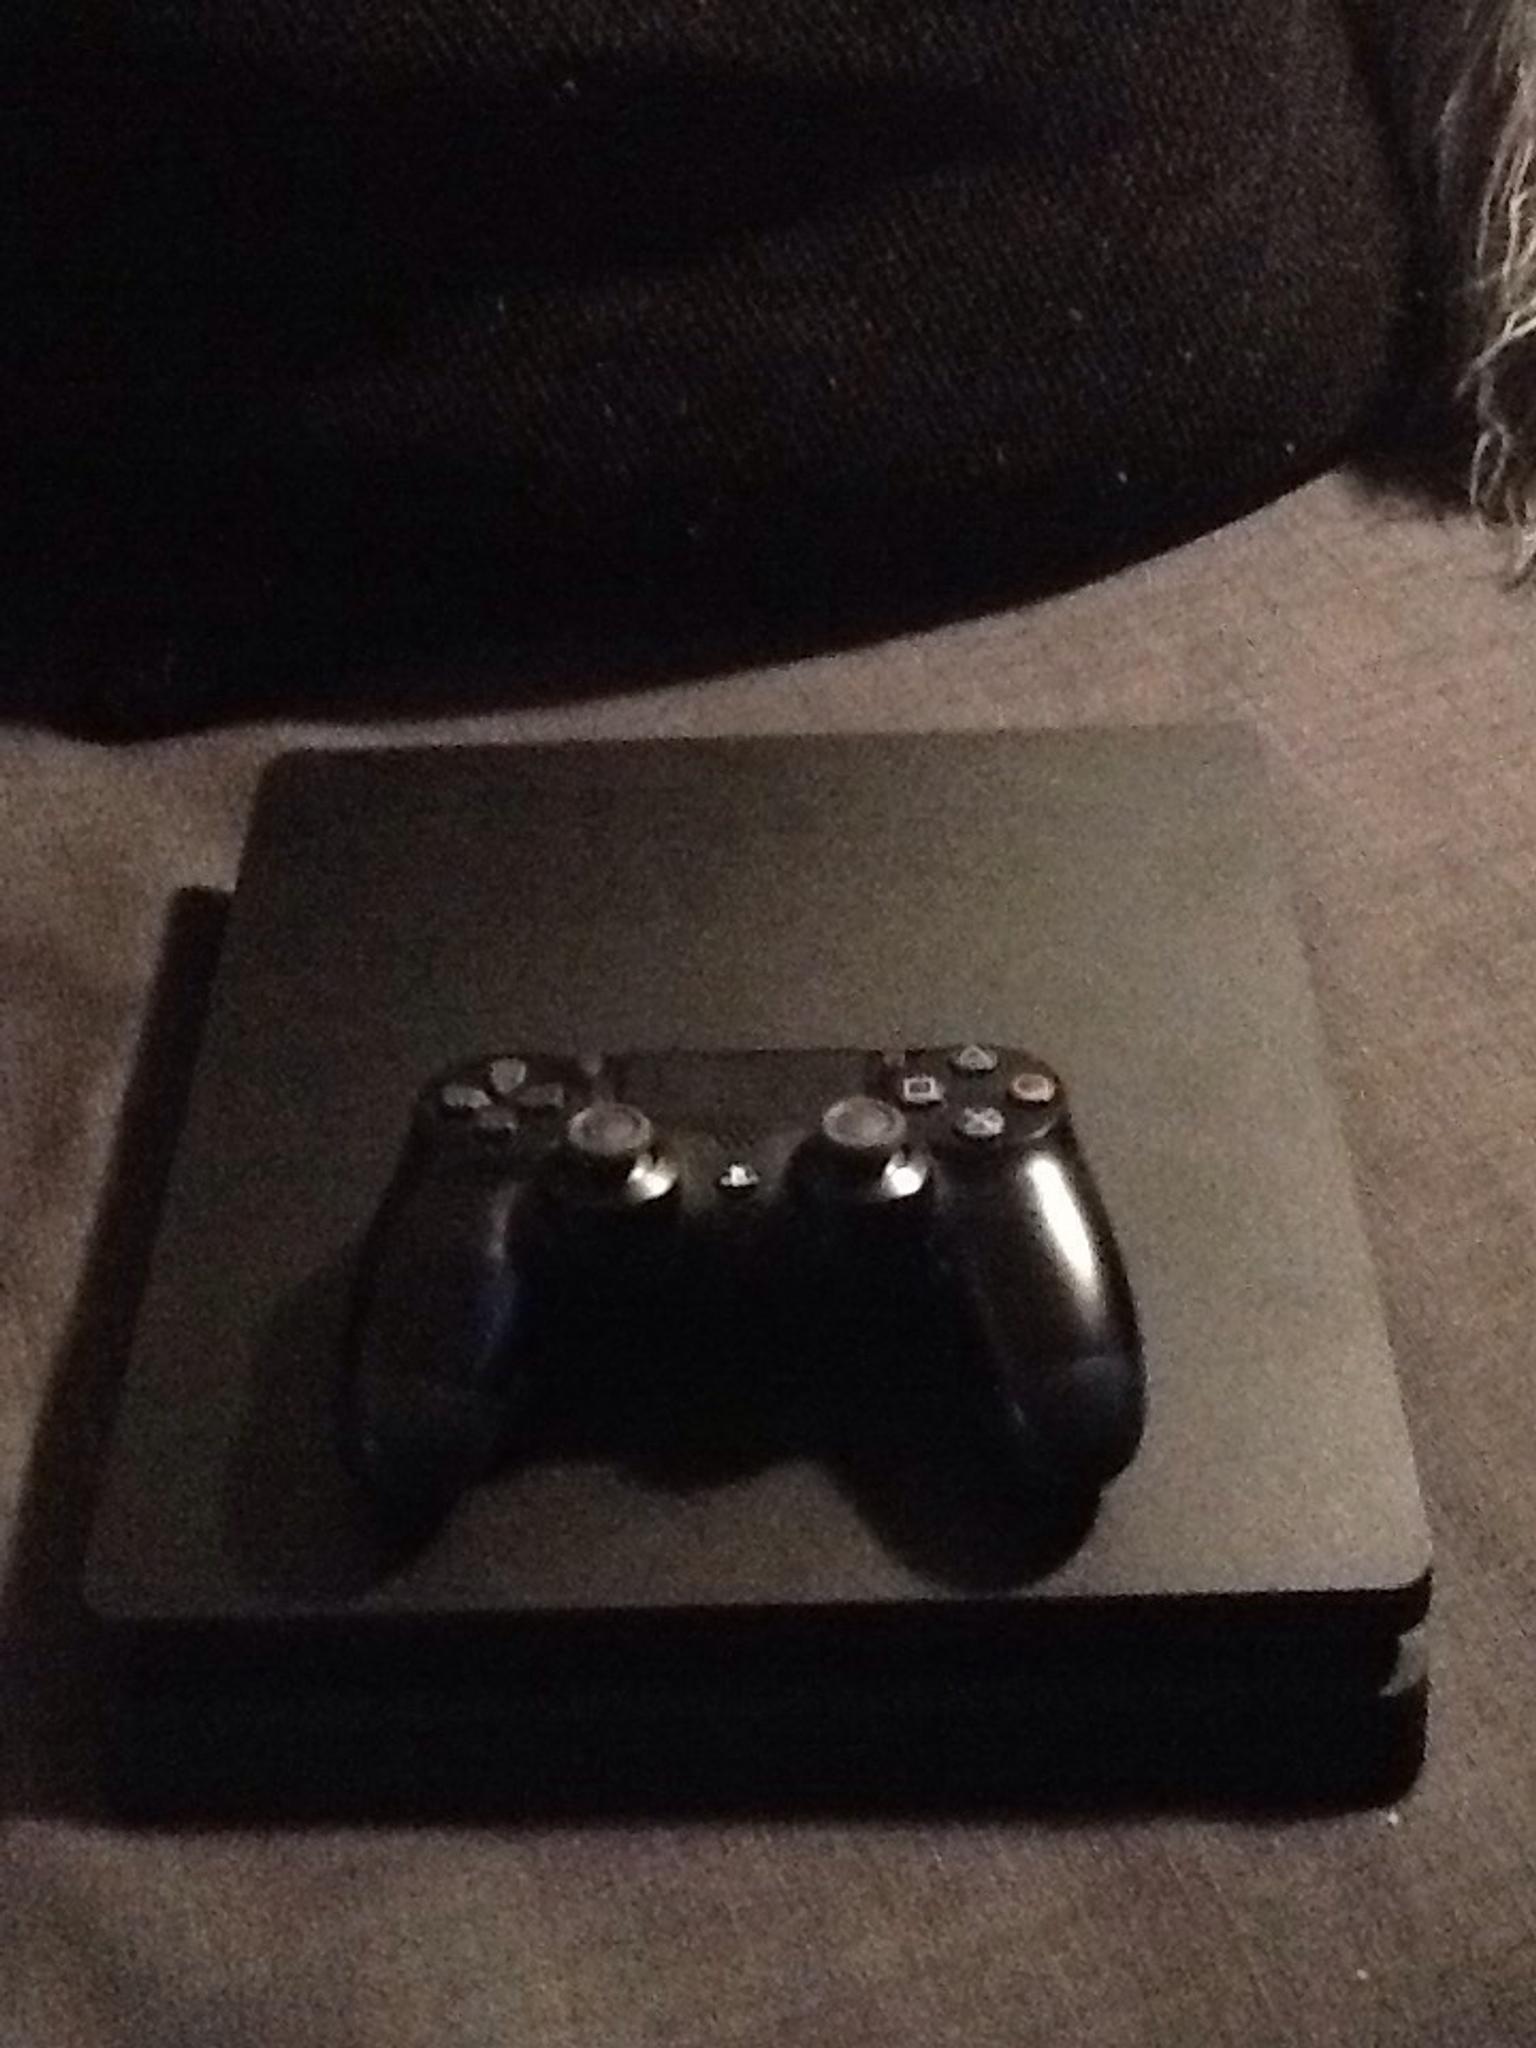 used ps4 controller for sale near me